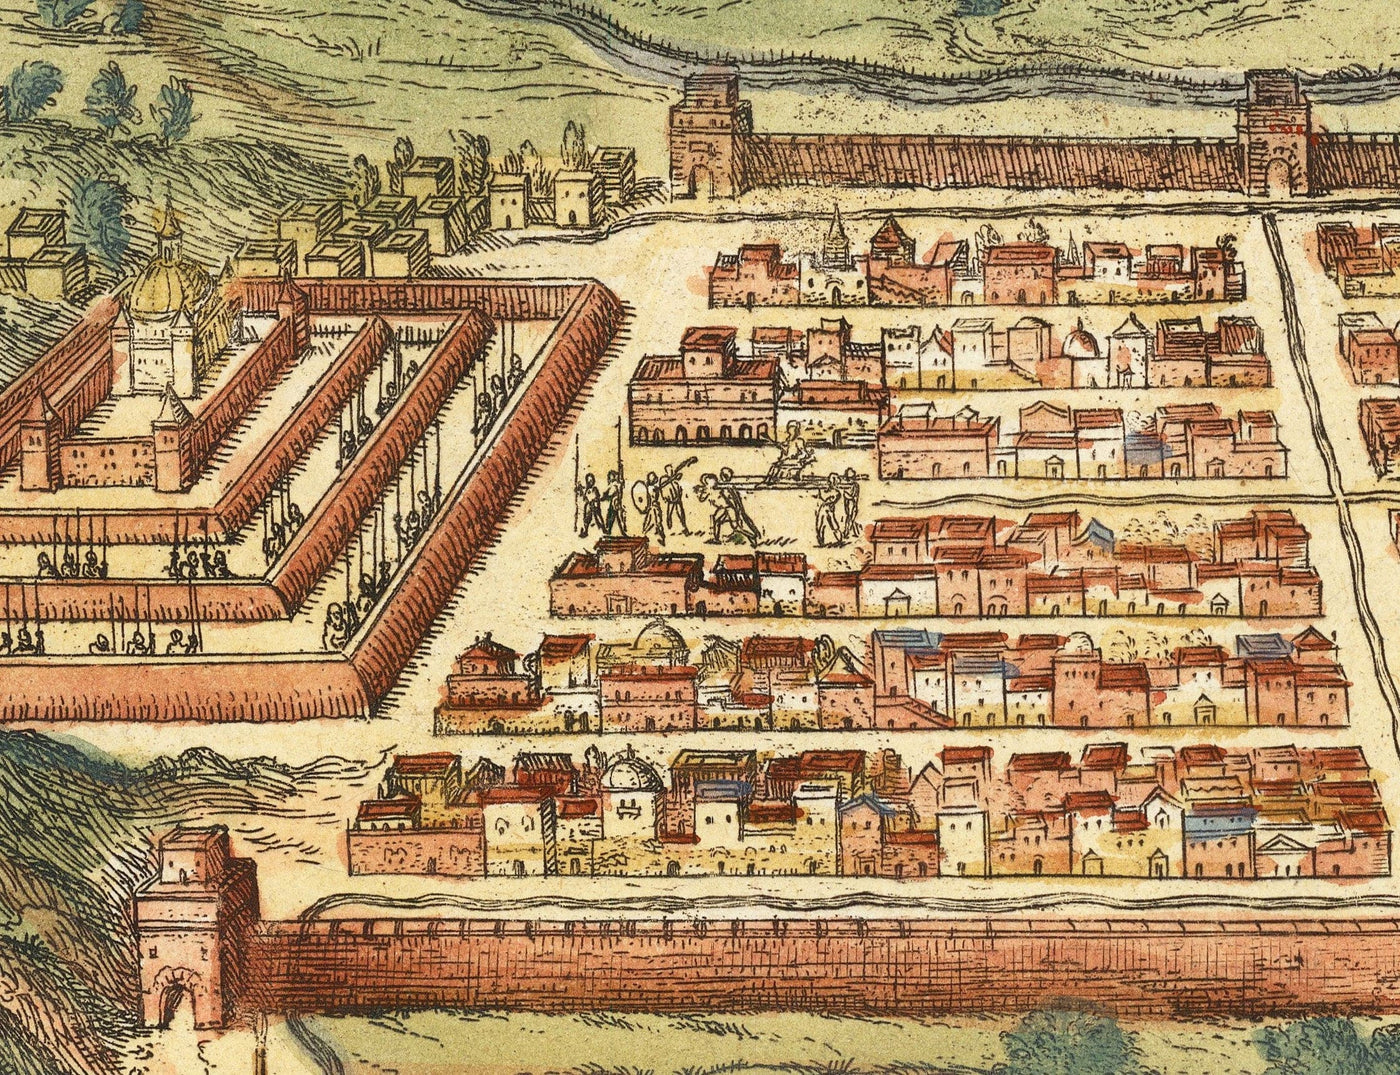 Old Map of Mexico City & Cusco, 1572 by Georg Braun - Aztec, Peru, Texcoco, Tenochtitlan, Spanish Colonialism